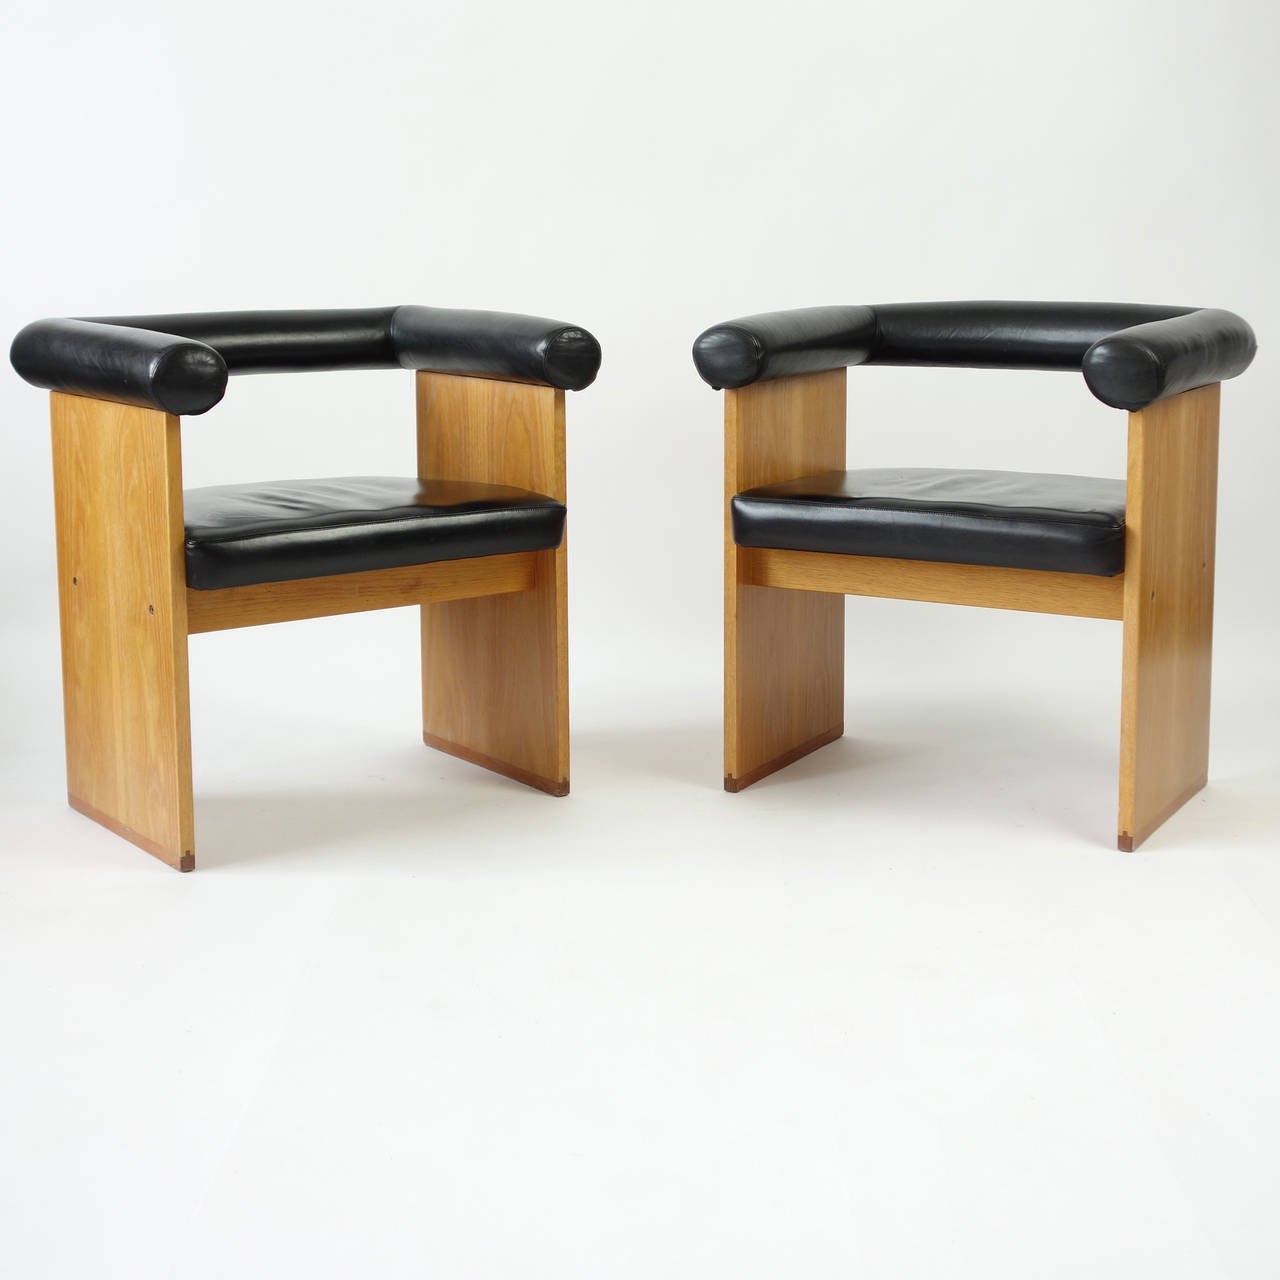 Bauhaus Pair of Leather and Limed Oak Minimalist Armchairs